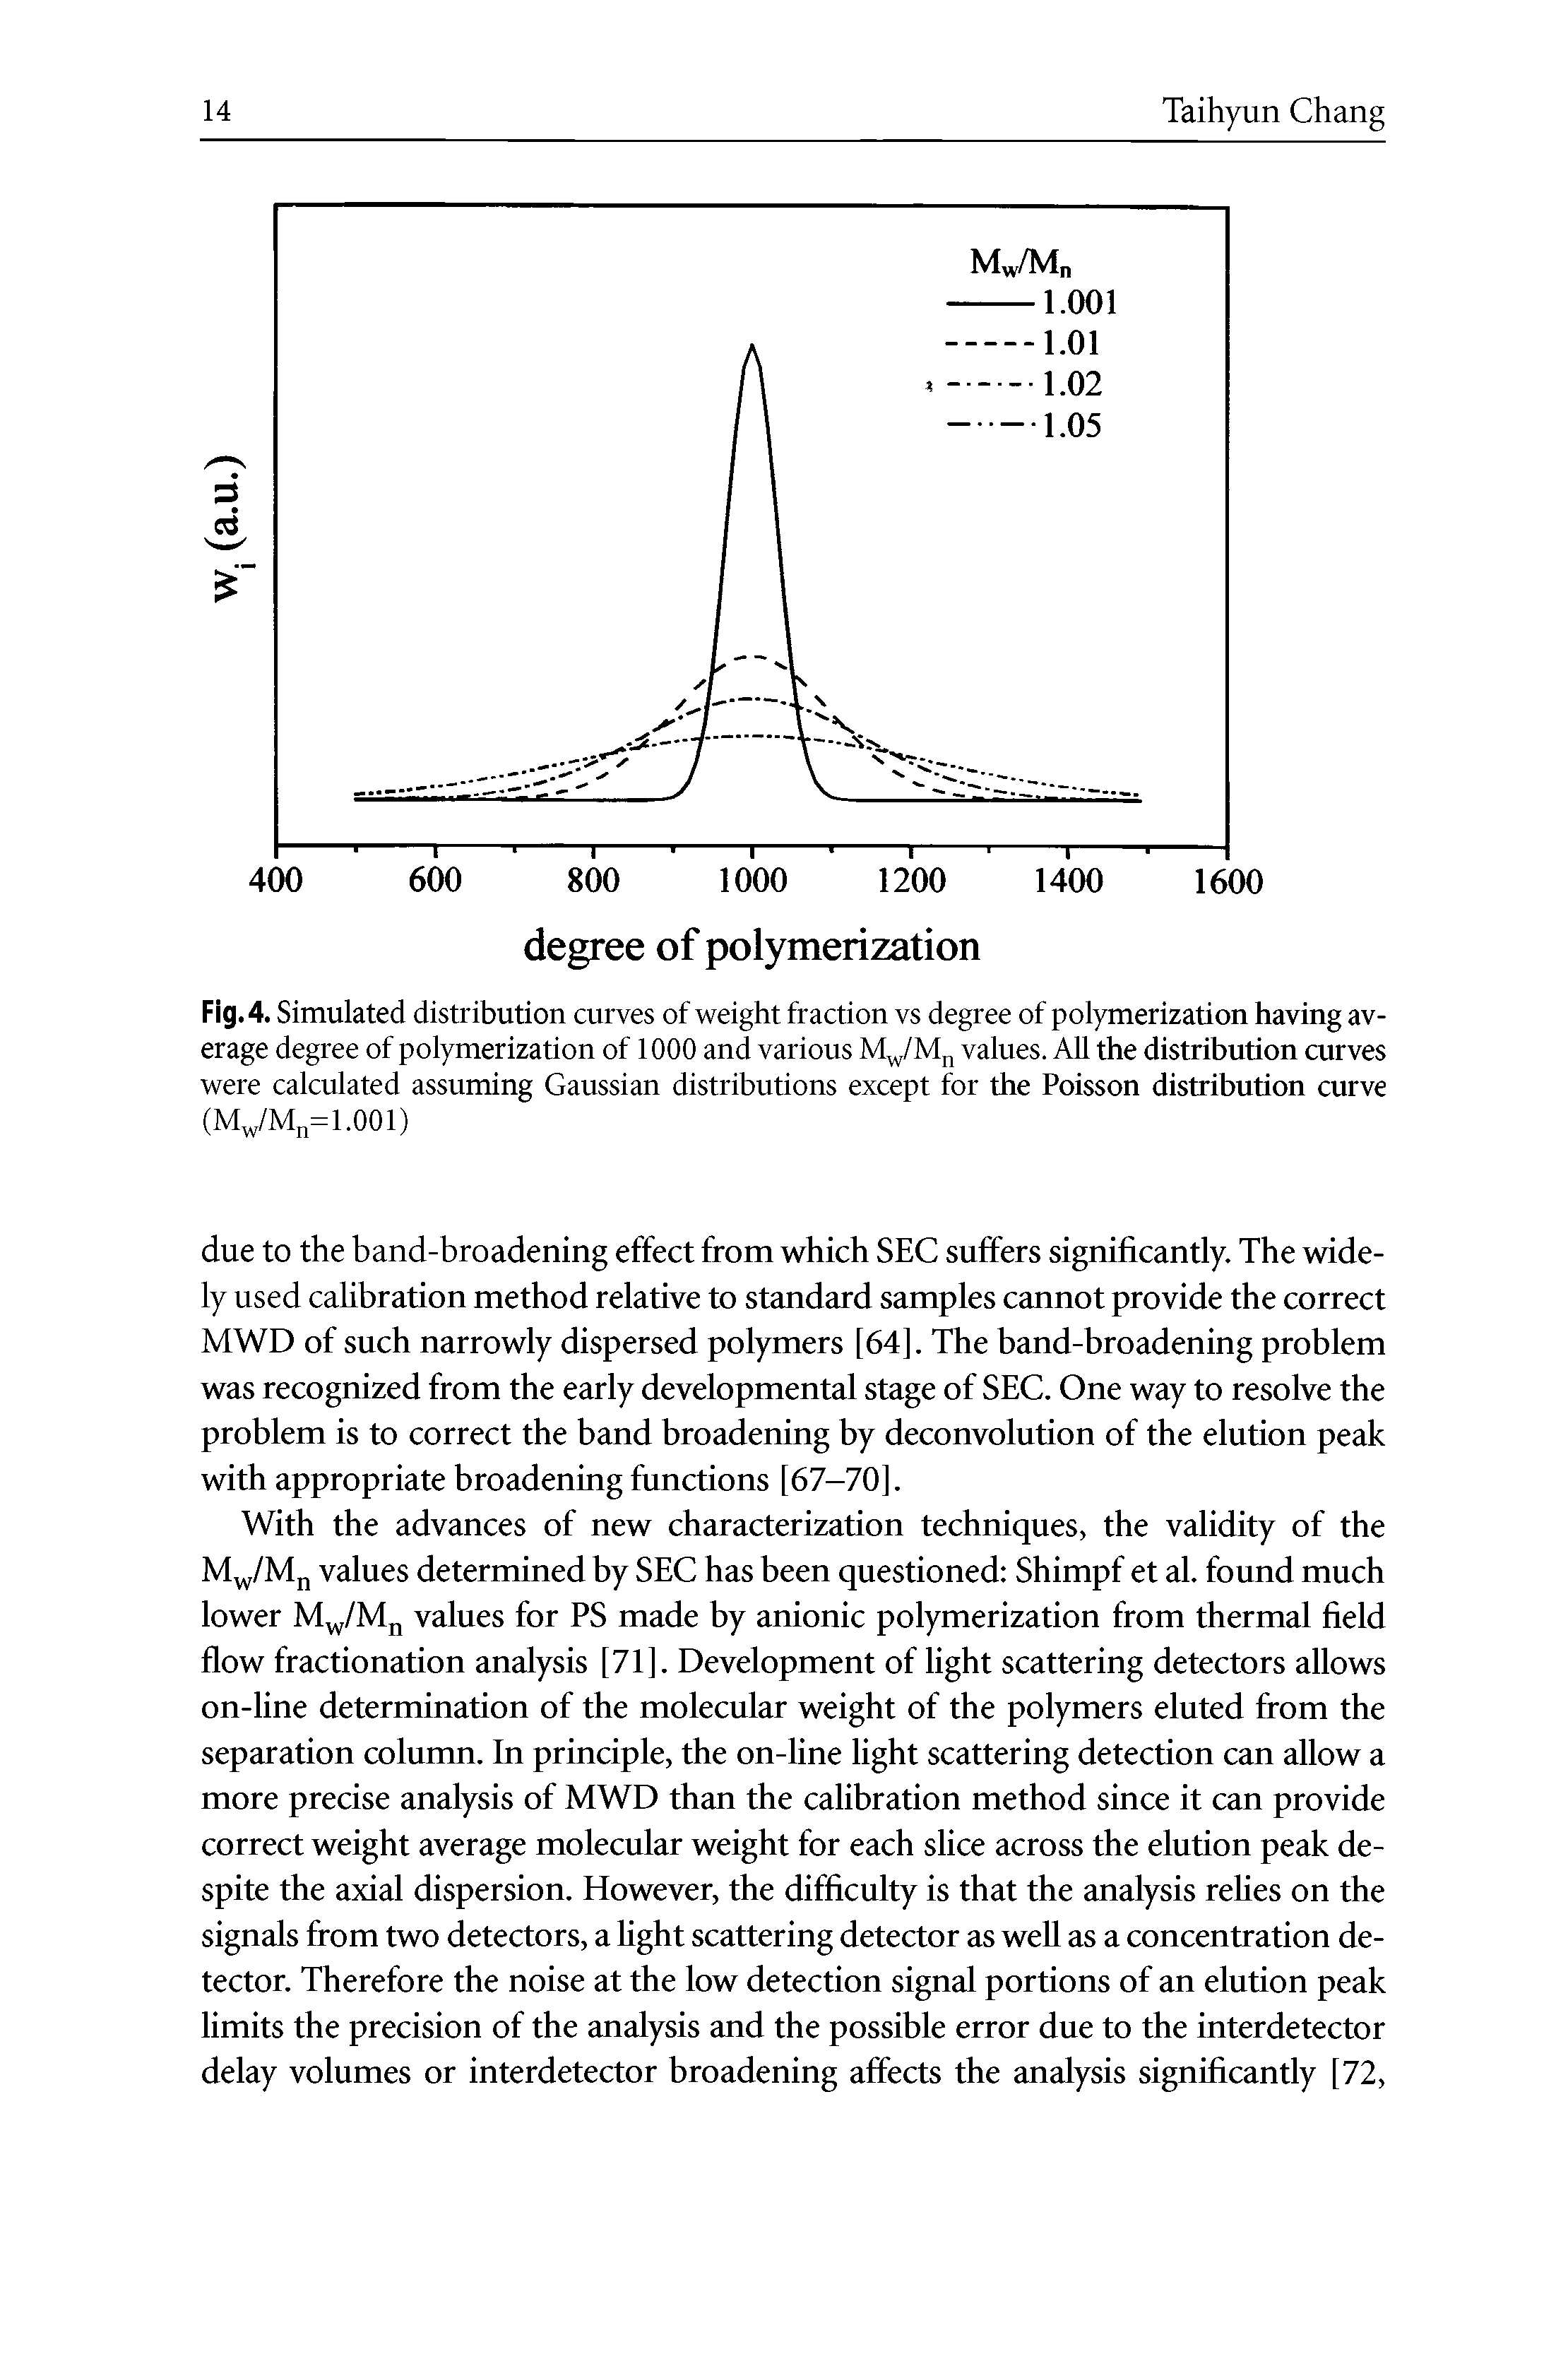 Fig.4. Simulated distribution curves of weight fraction vs degree of polymerization having average degree of polymerization of 1000 and various M Mjj values. All the distribution curves were calculated assuming Gaussian distributions except for the Poisson distribution curve (MJM = 1.001)...